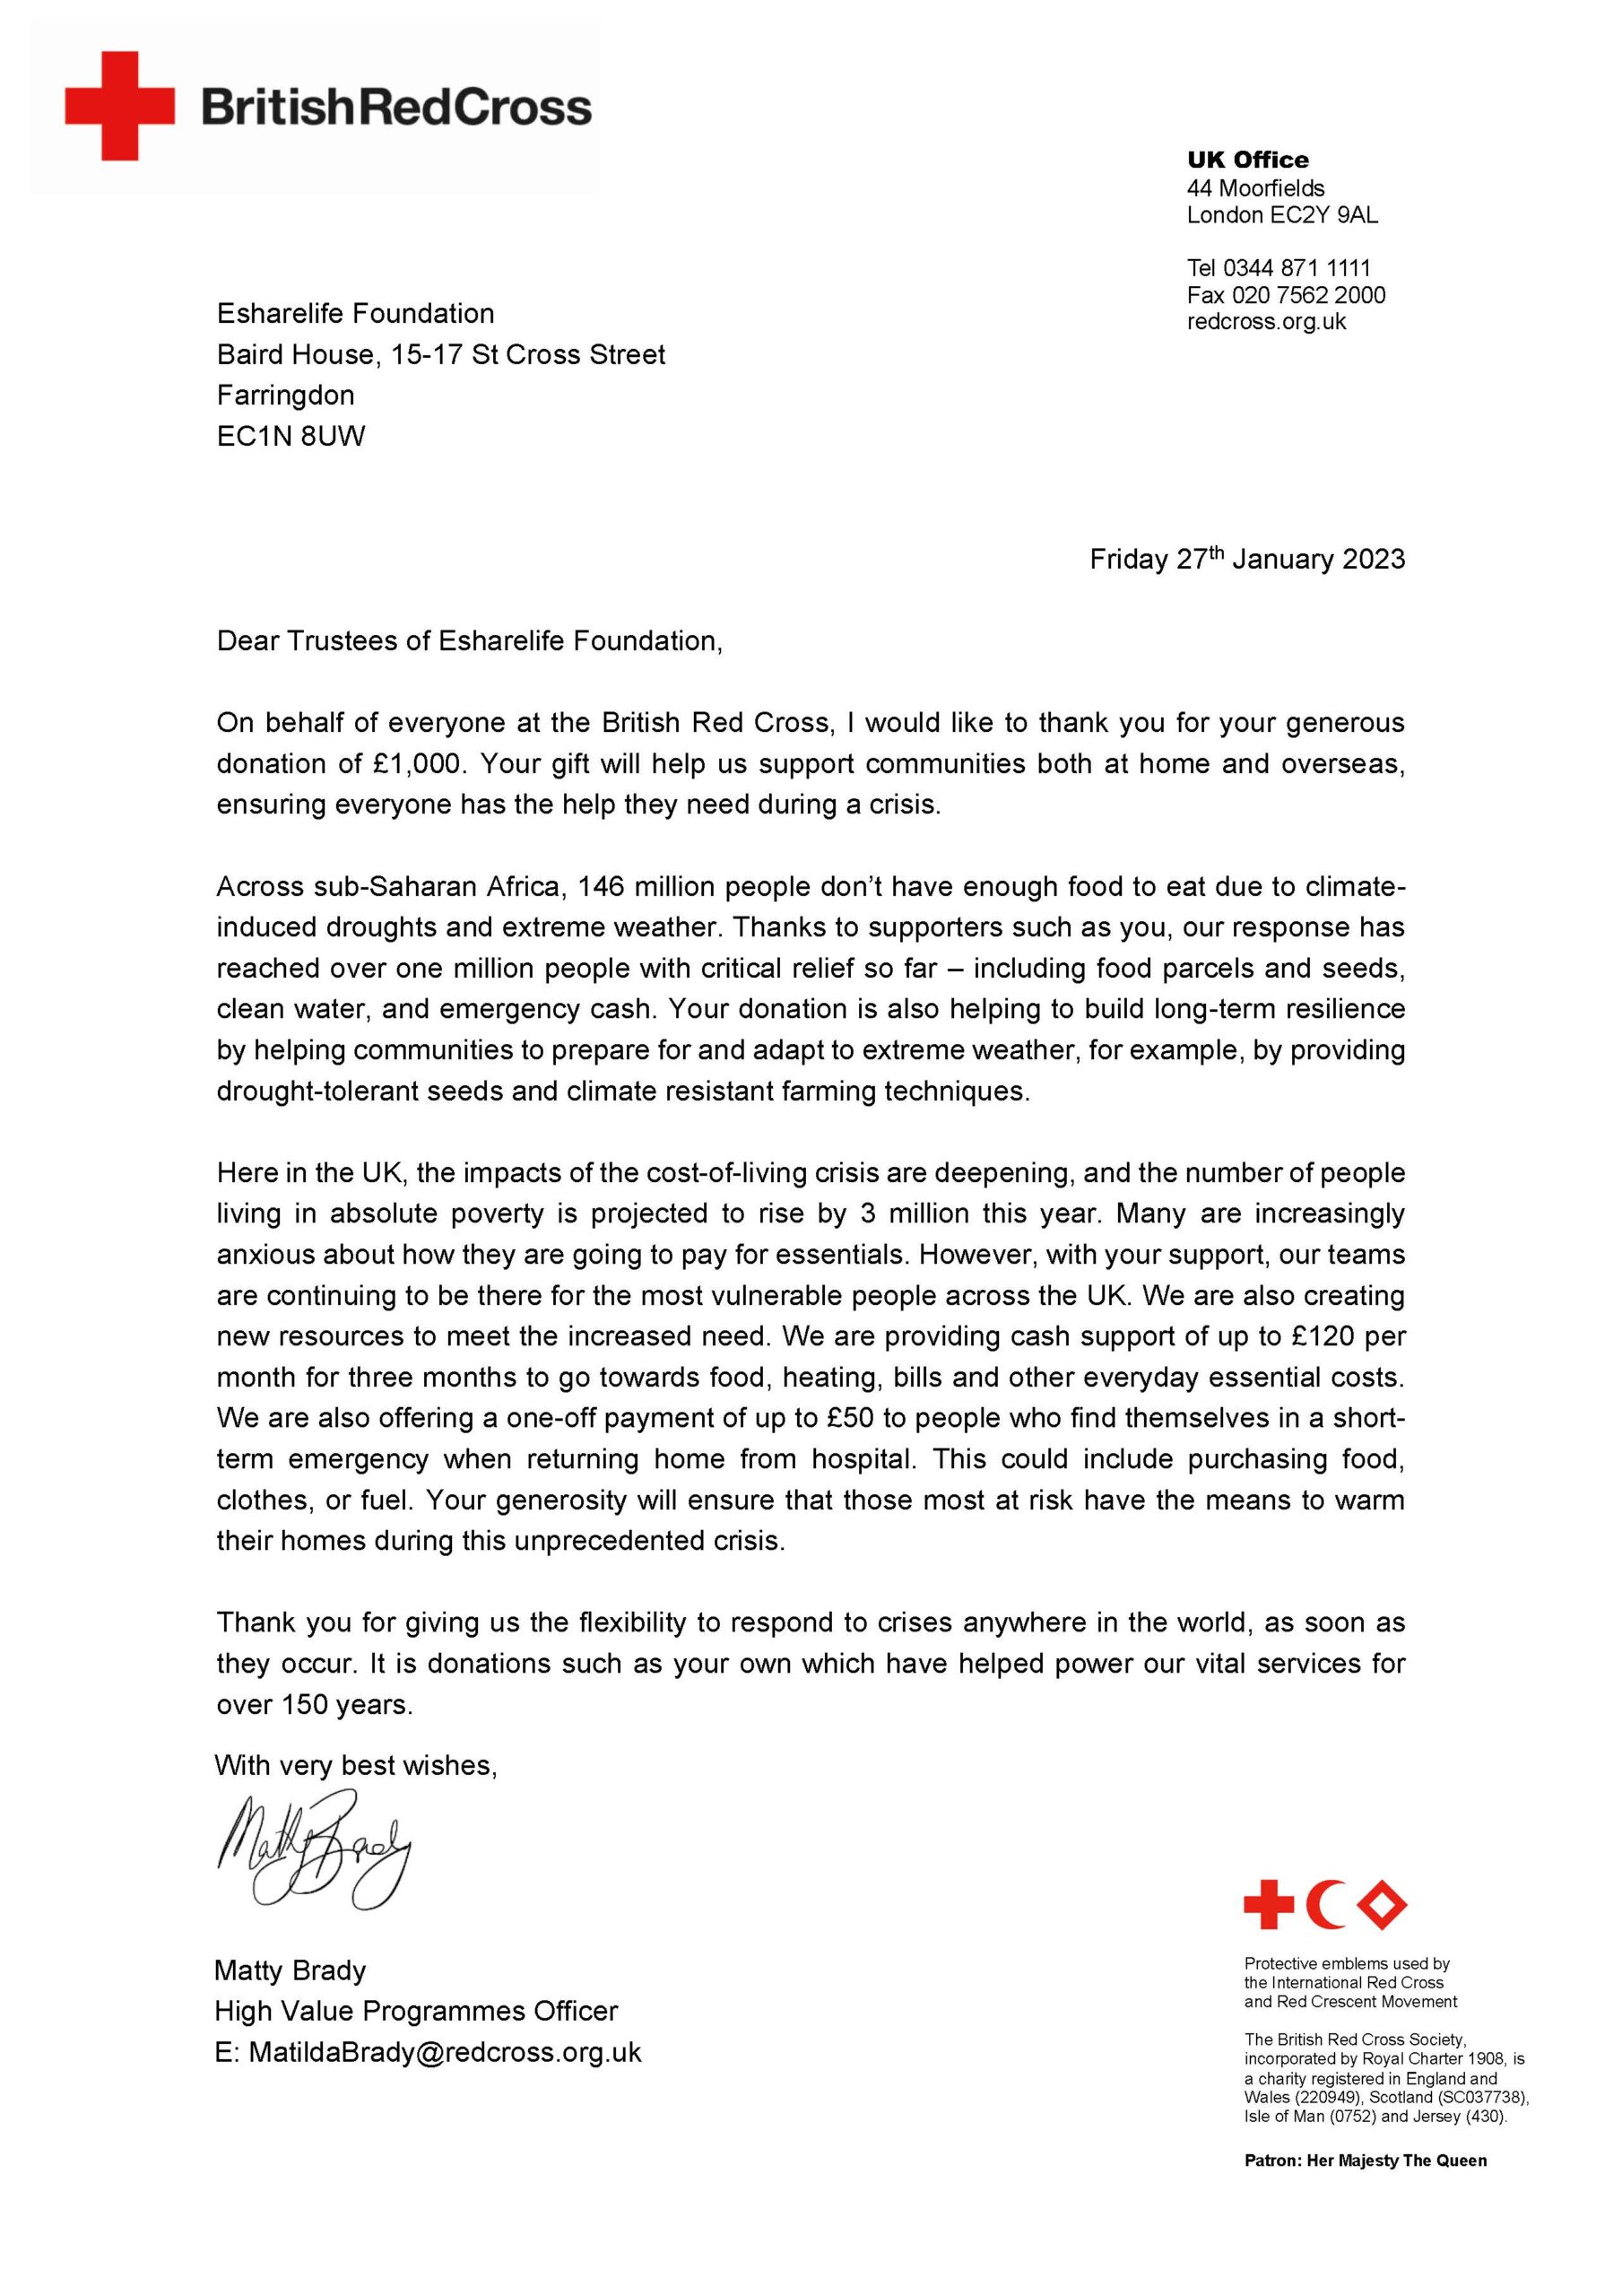 British Red Cross thank you letter to Esharelife